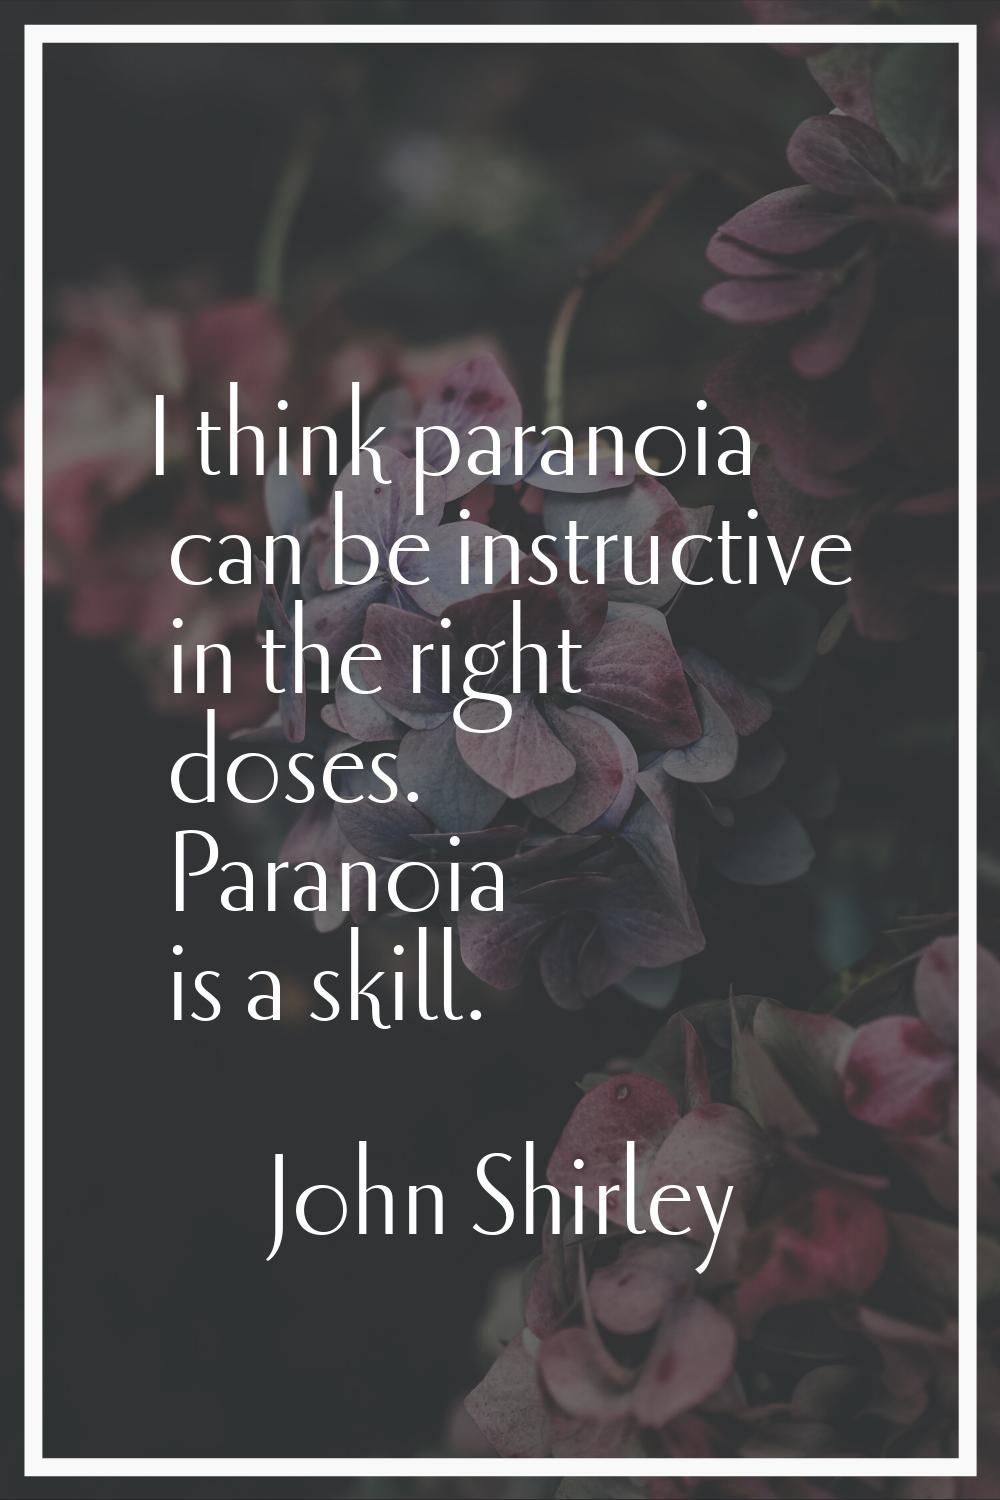 I think paranoia can be instructive in the right doses. Paranoia is a skill.